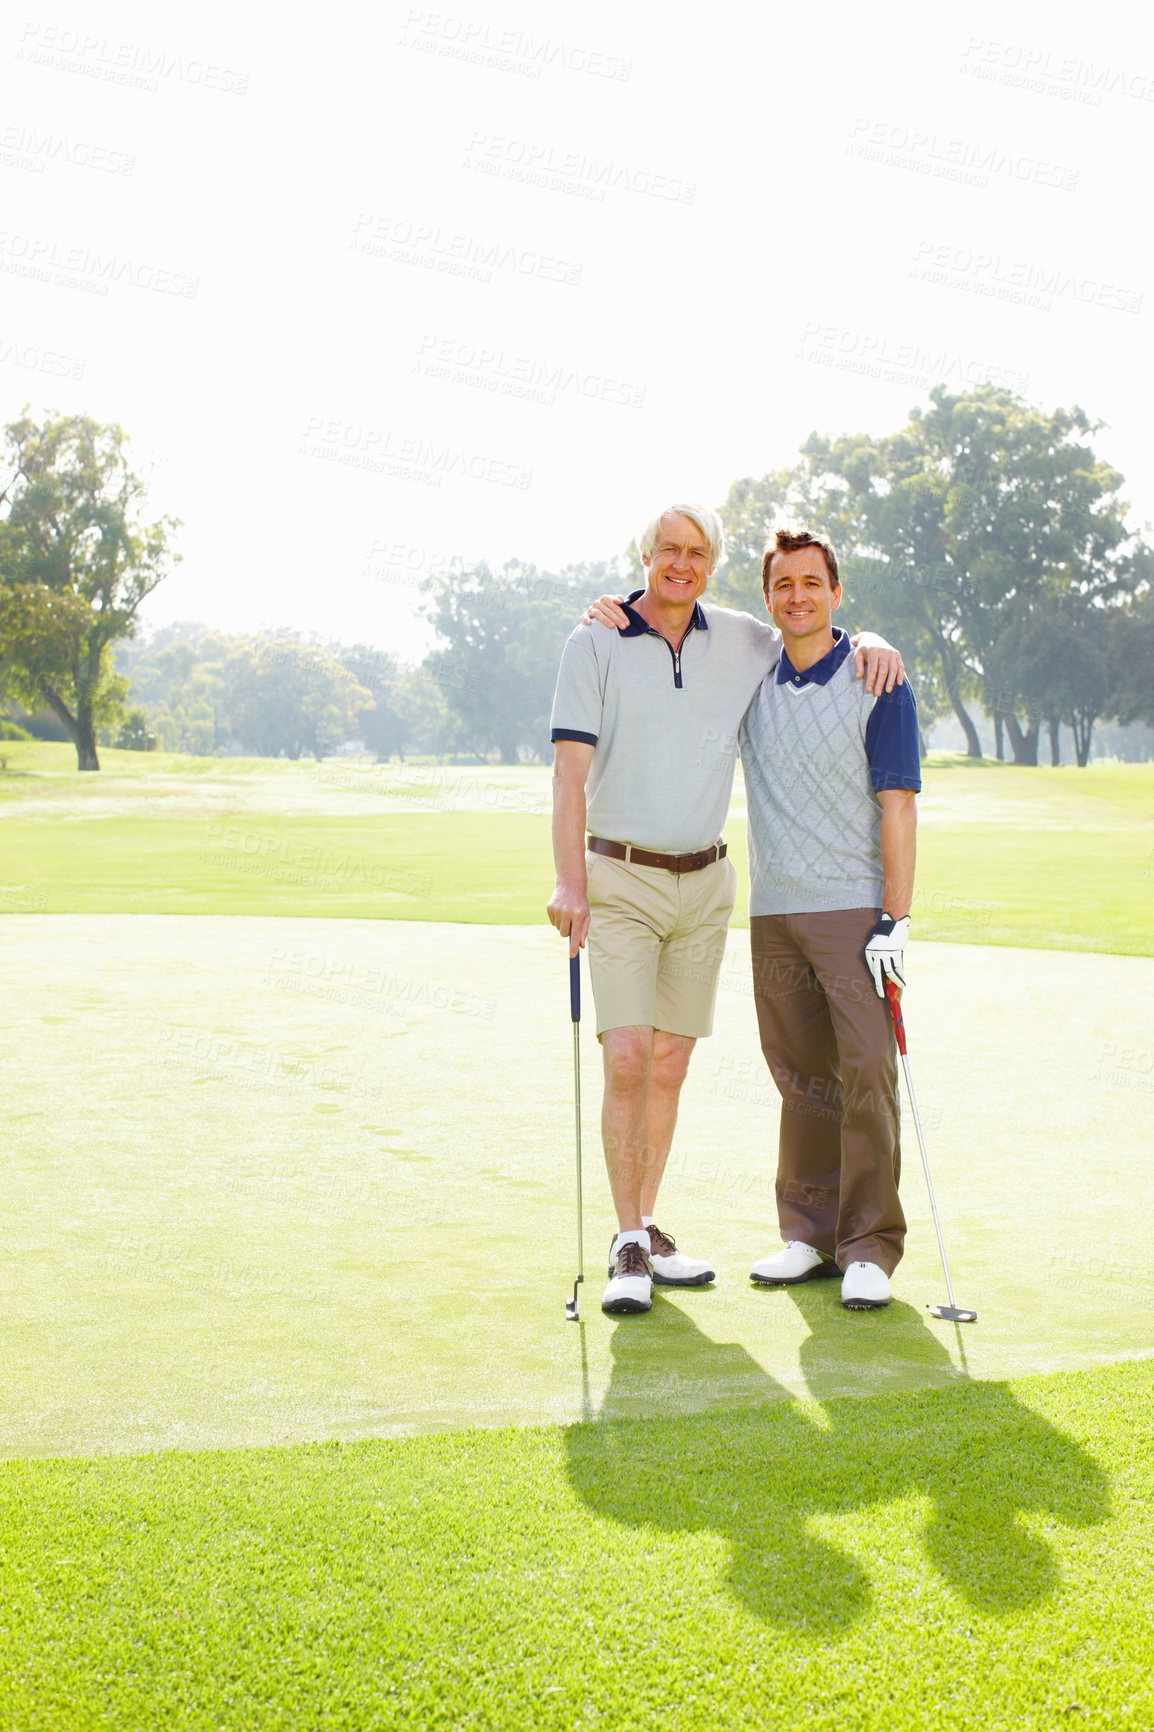 Buy stock photo Full length of father and son standing on golf course with arms around - copyspace